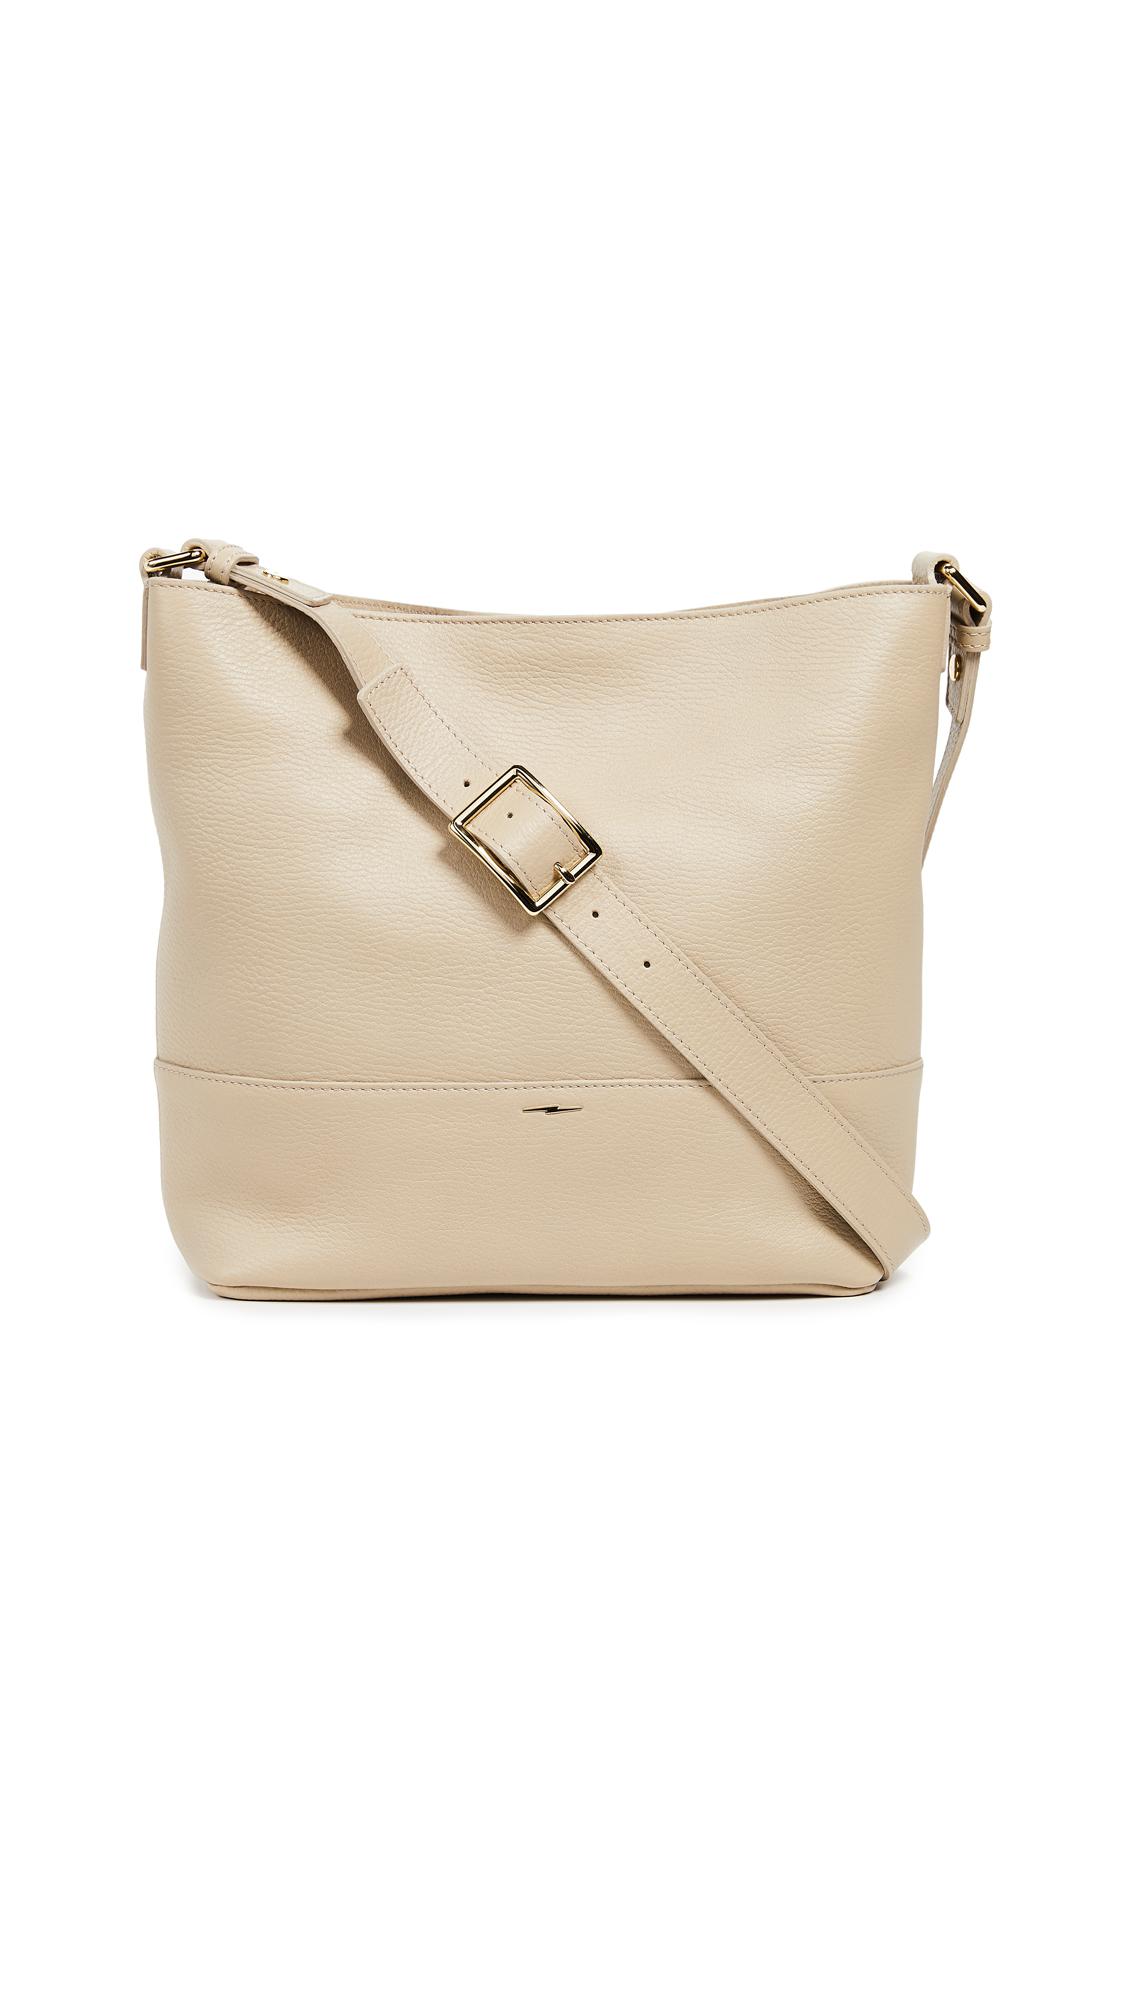 Shinola Leather Small Relaxed Hobo Bag in Stone (Natural) - Lyst